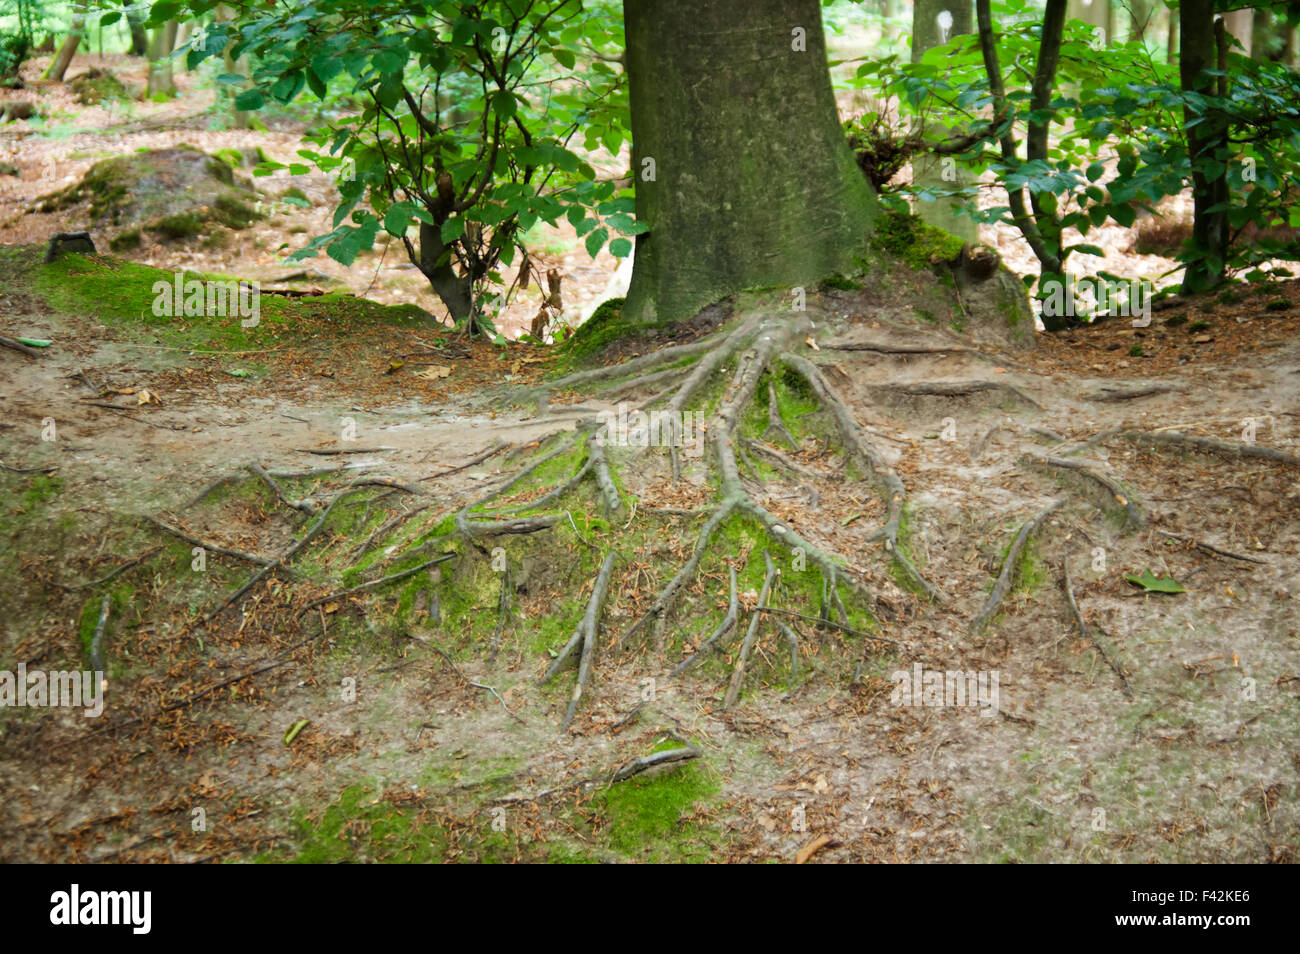 Roots of a tree Stock Photo